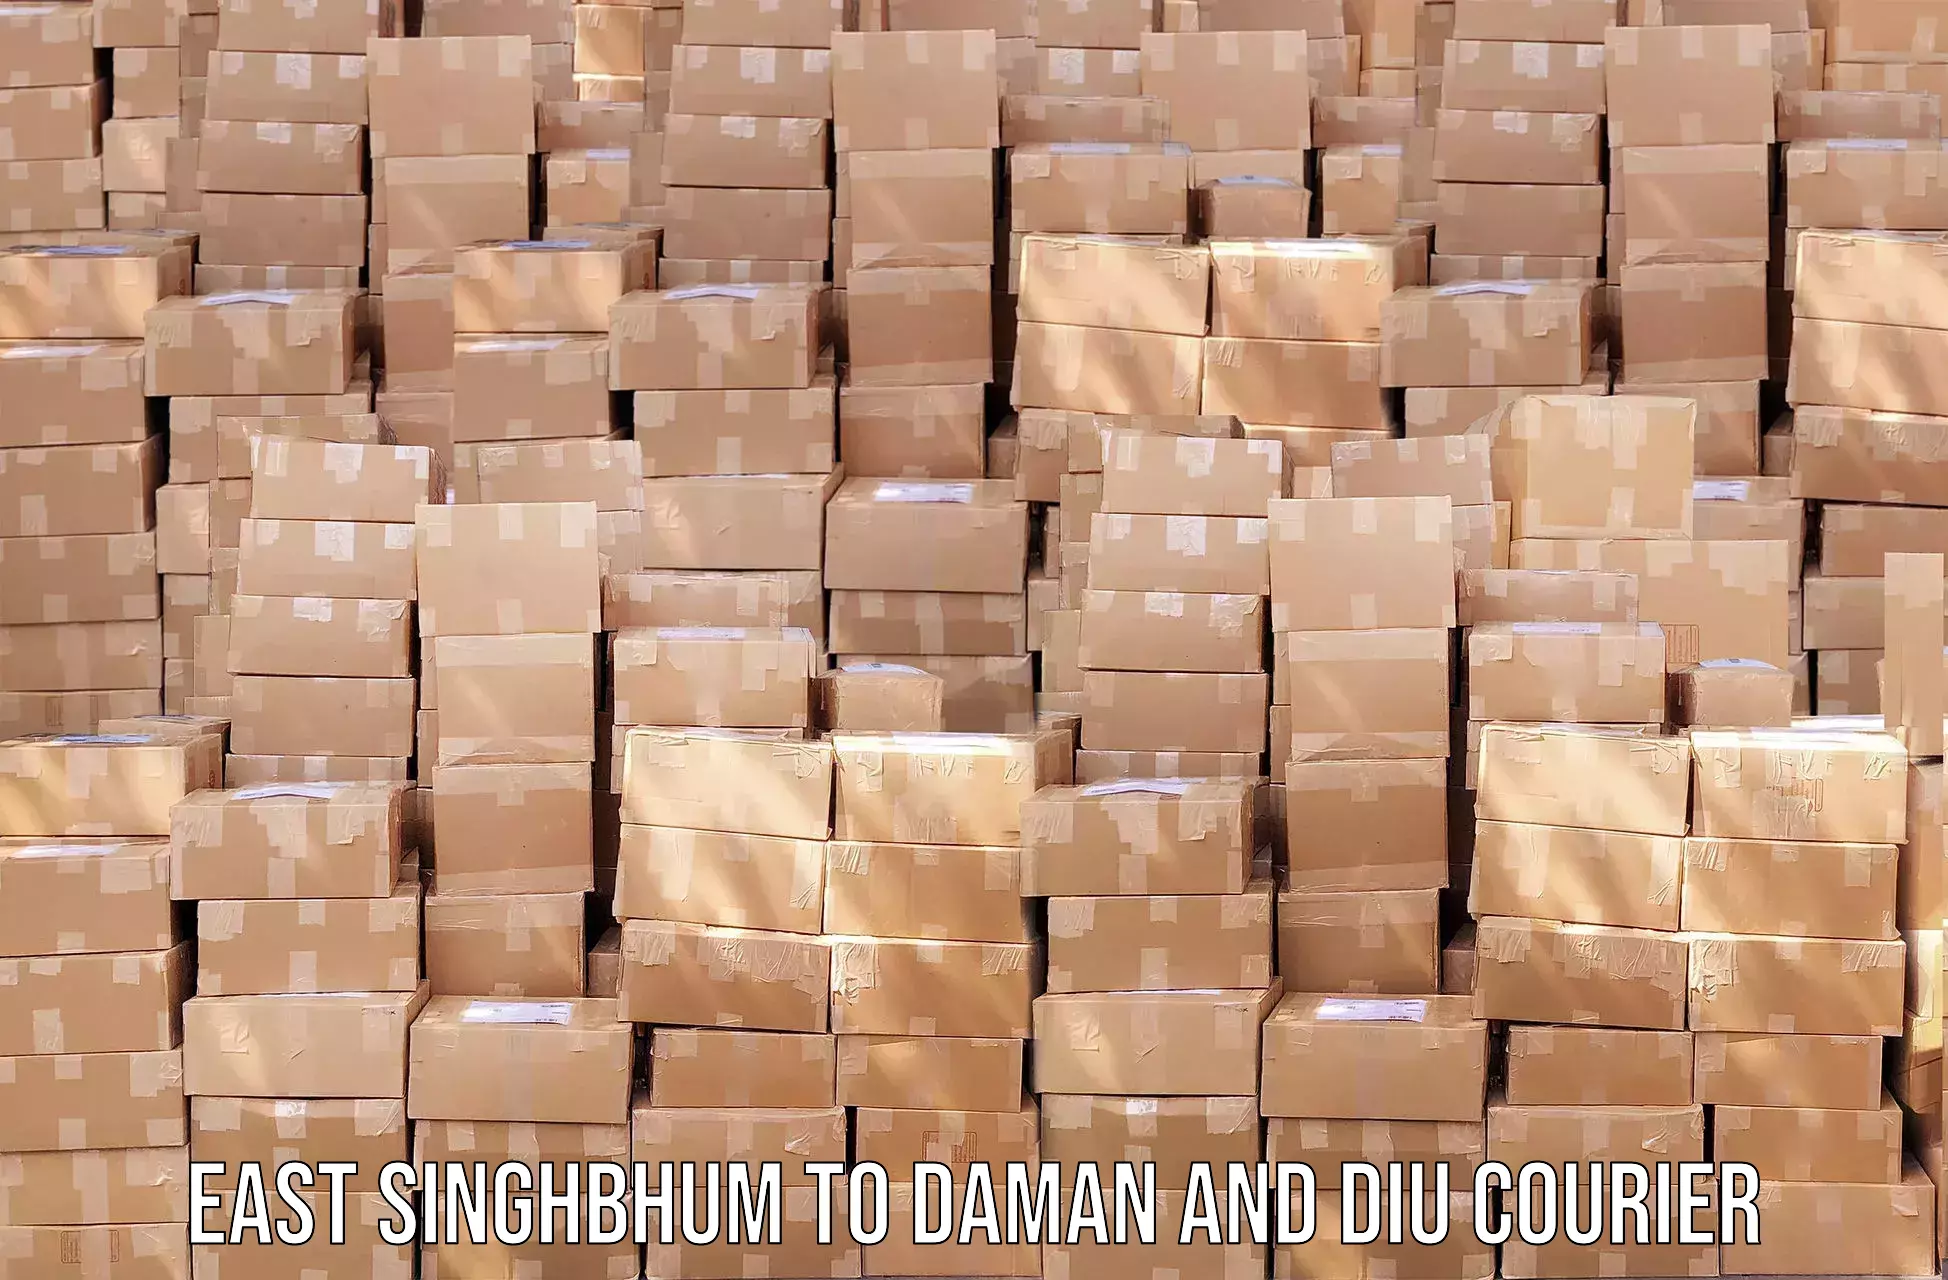 Online courier booking East Singhbhum to Daman and Diu